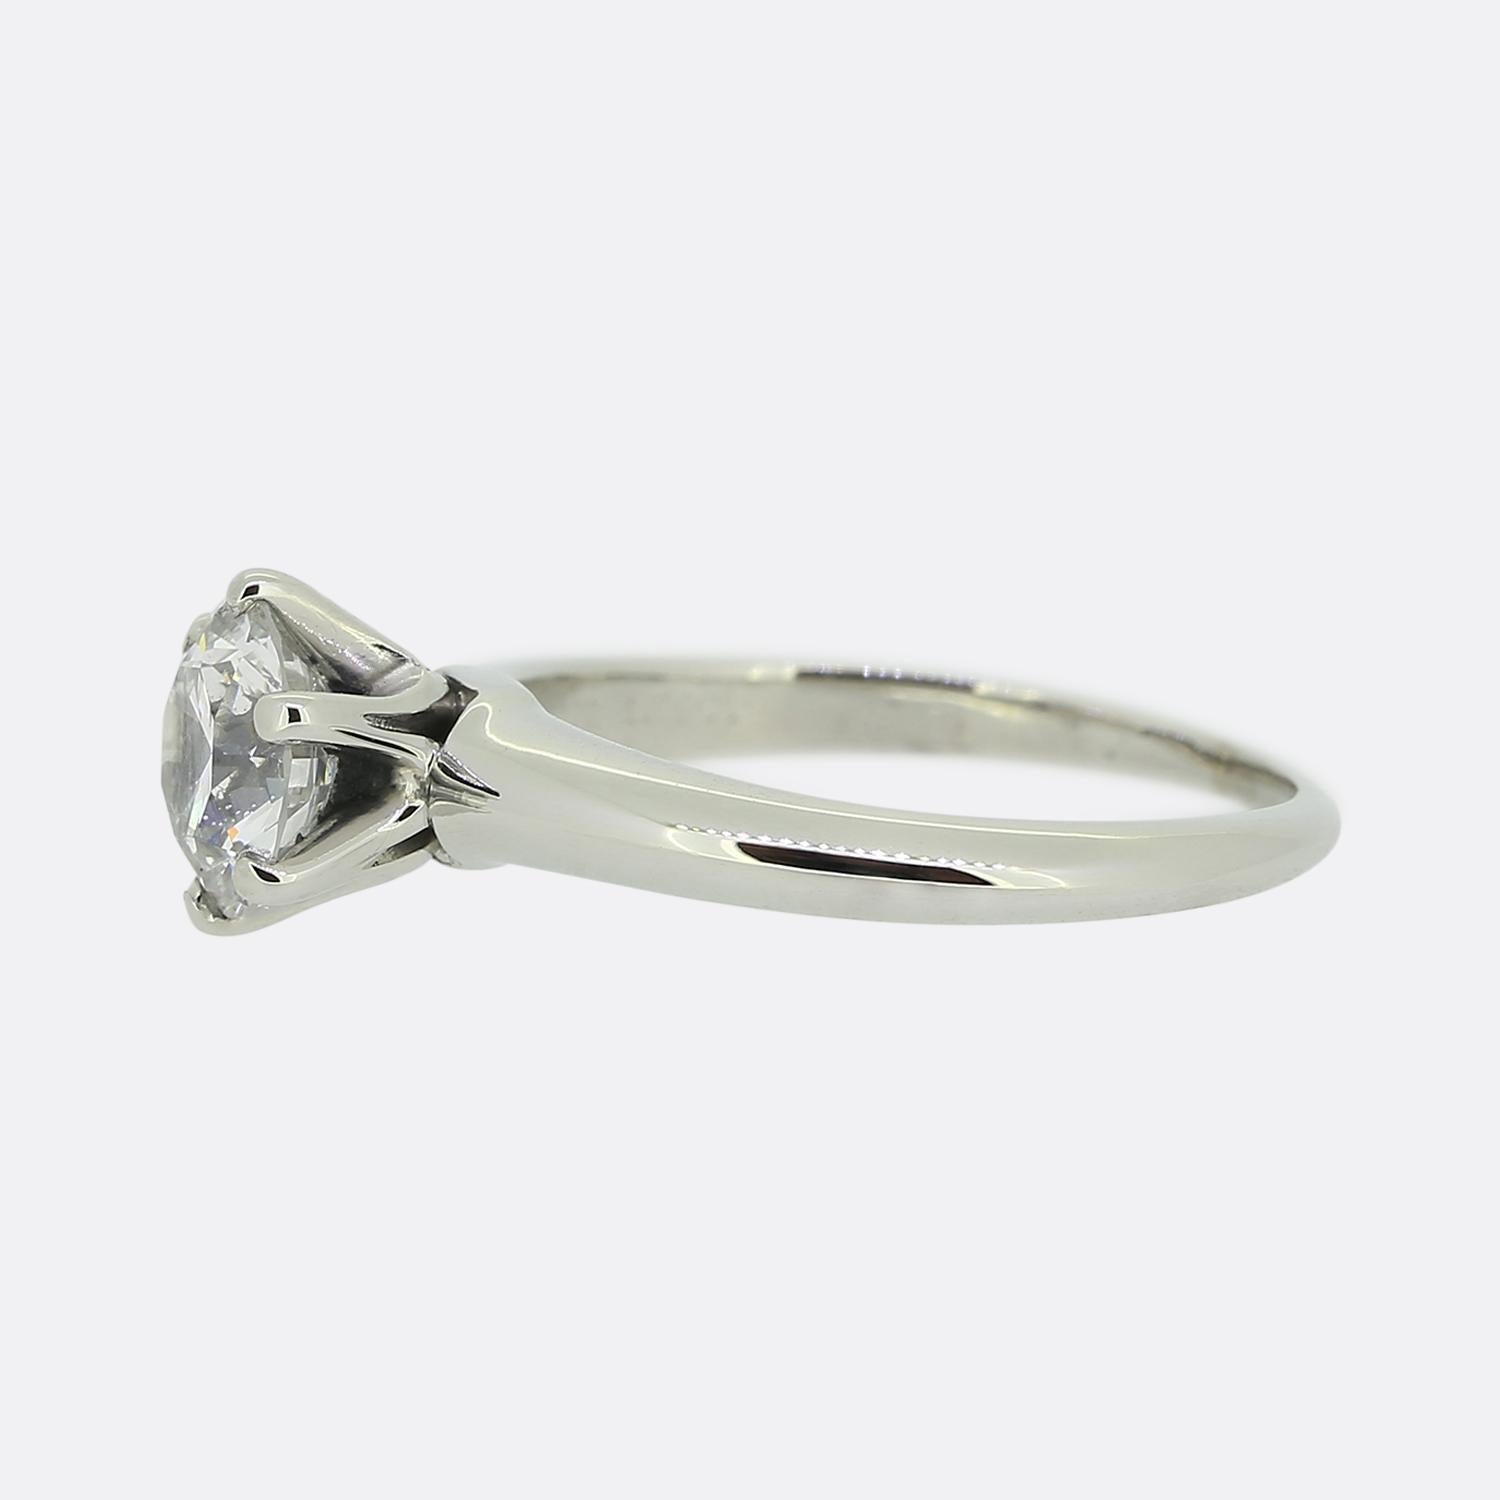 Here we have a beautiful solitaire engagement ring from the world renowned jewellery designer, Tiffany & Co. The centre stone is a stunning 1.01 carat round brilliant cut diamond which has been set in Tiffany's iconic 6 clawed mount atop a platinum